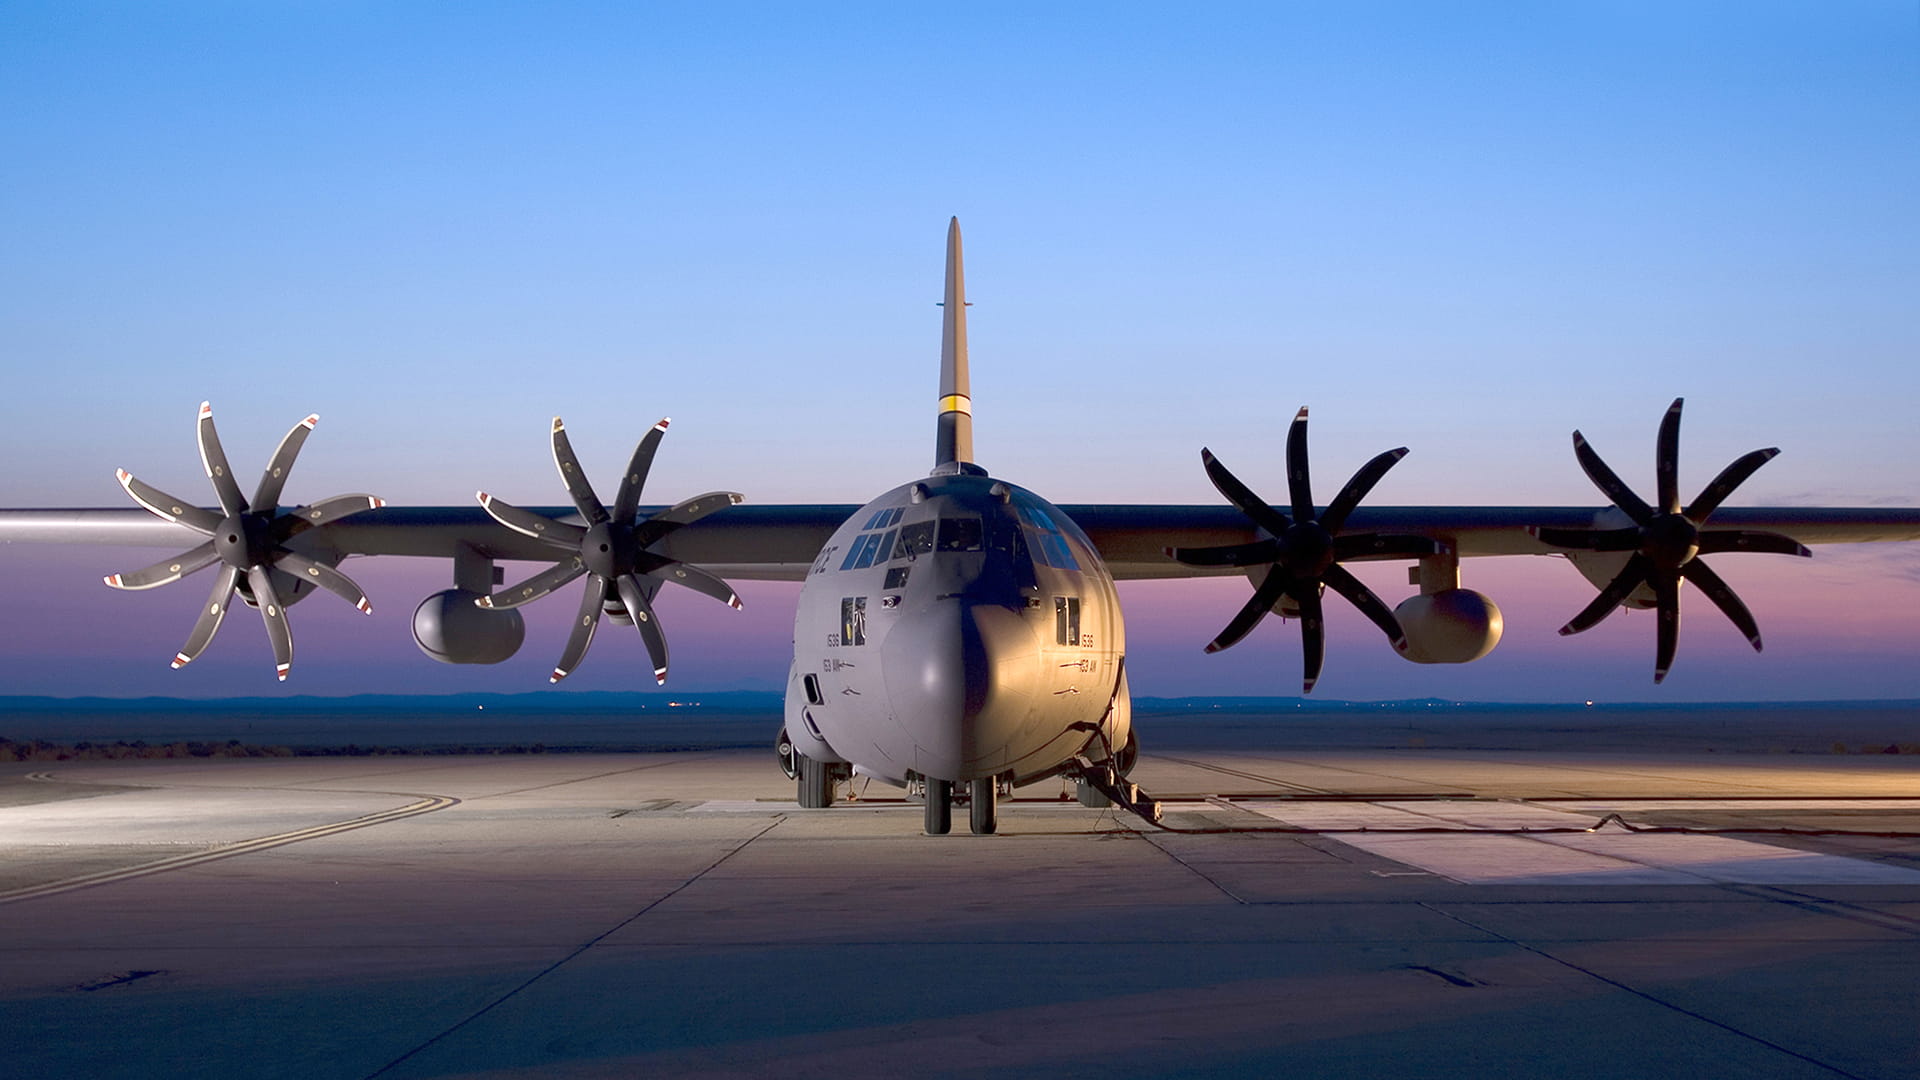 Military C-130 plane in night photography